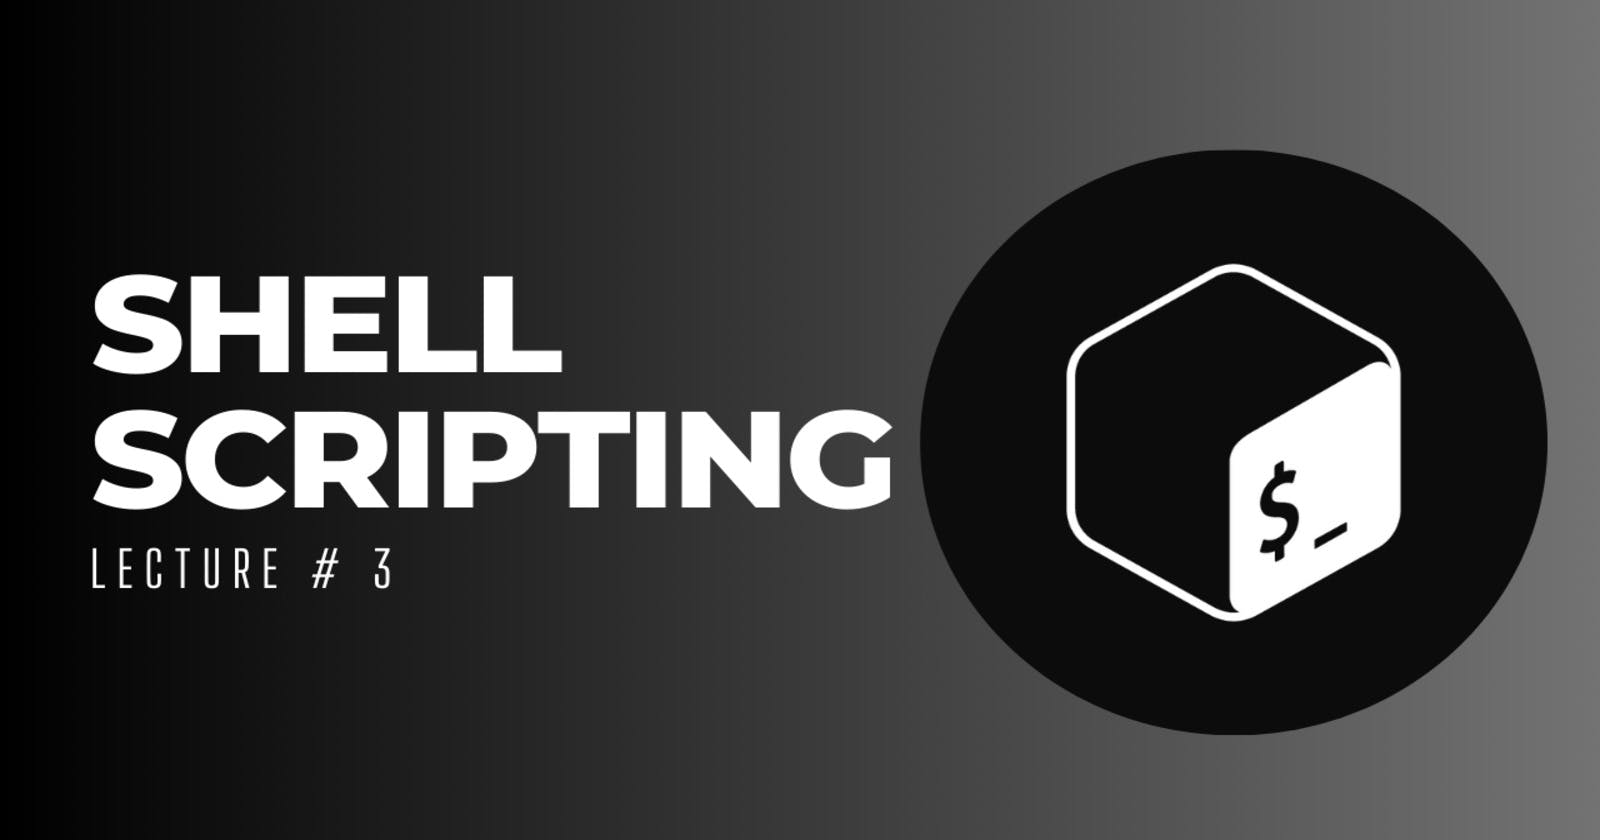 Lecture # 3 - Basic Shell Script